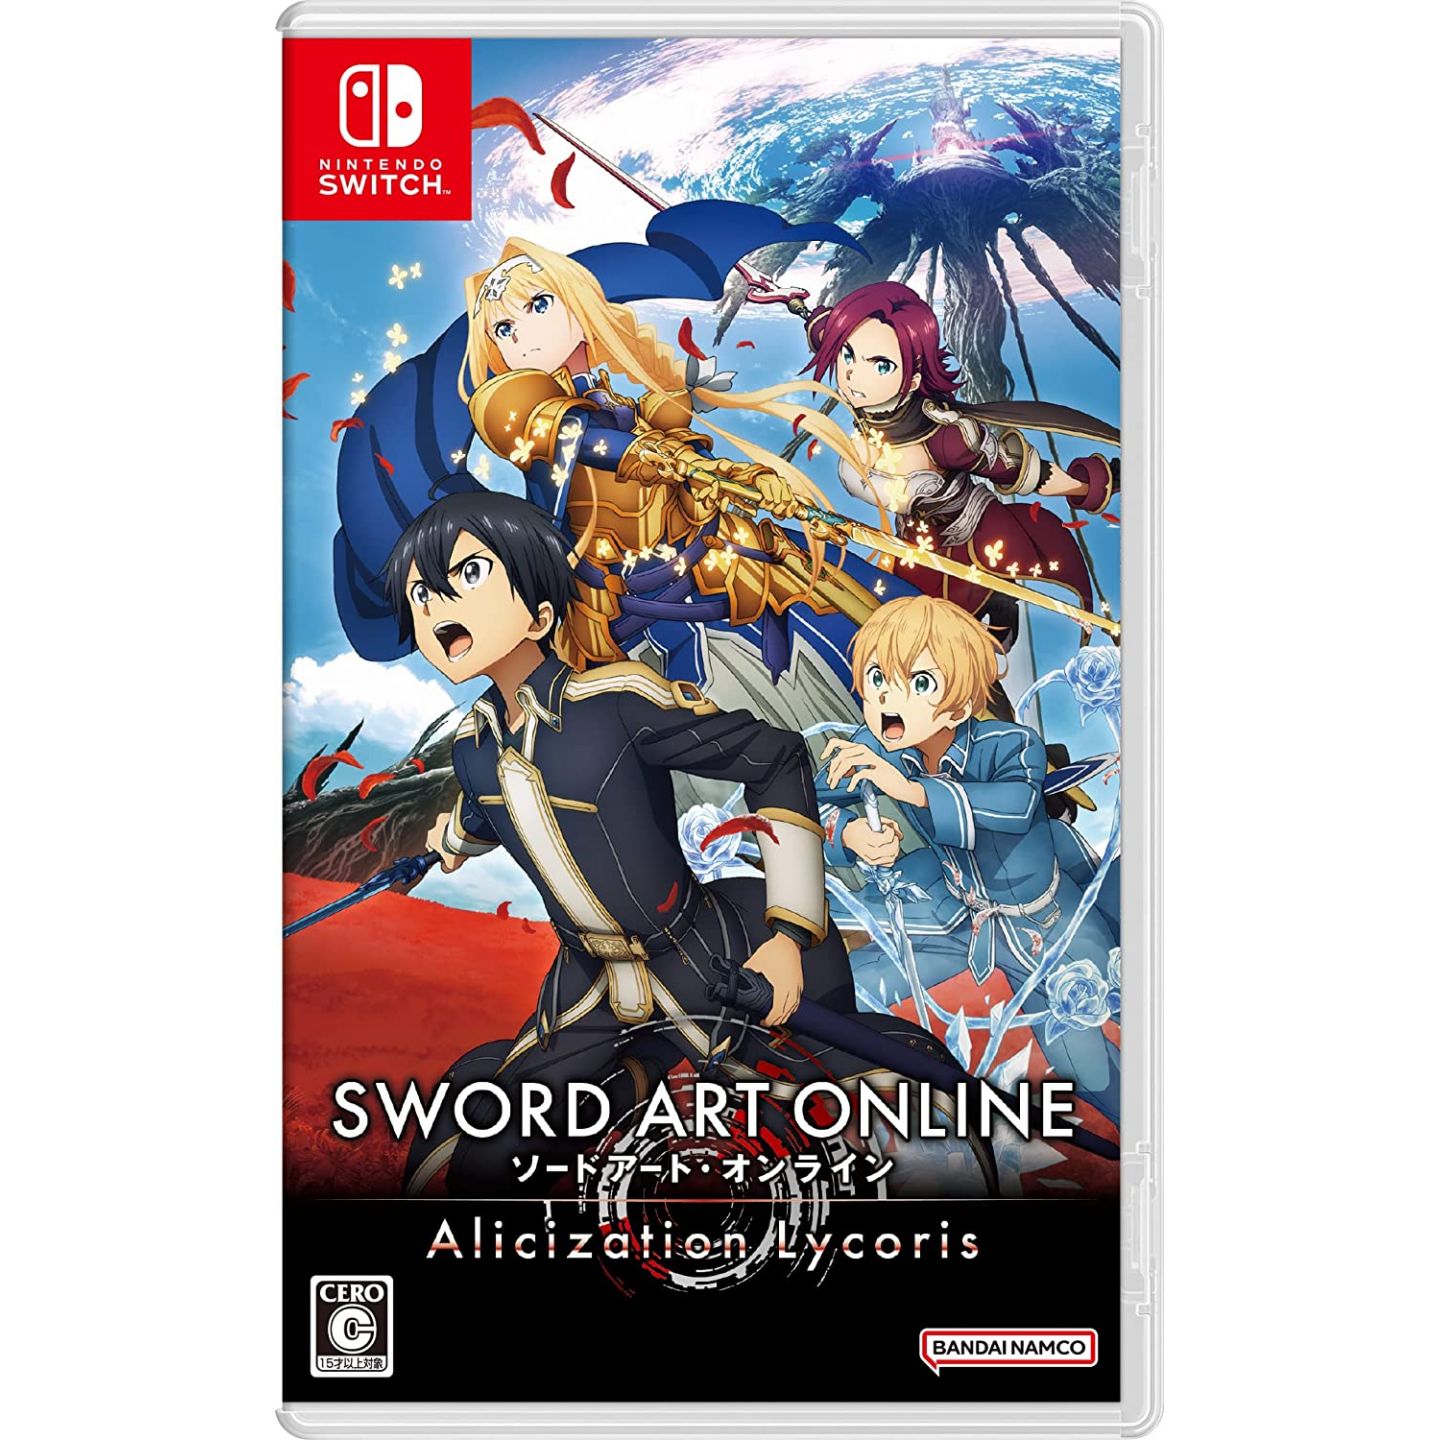 Sword Art Online Games Being Considered for Nintendo Switch